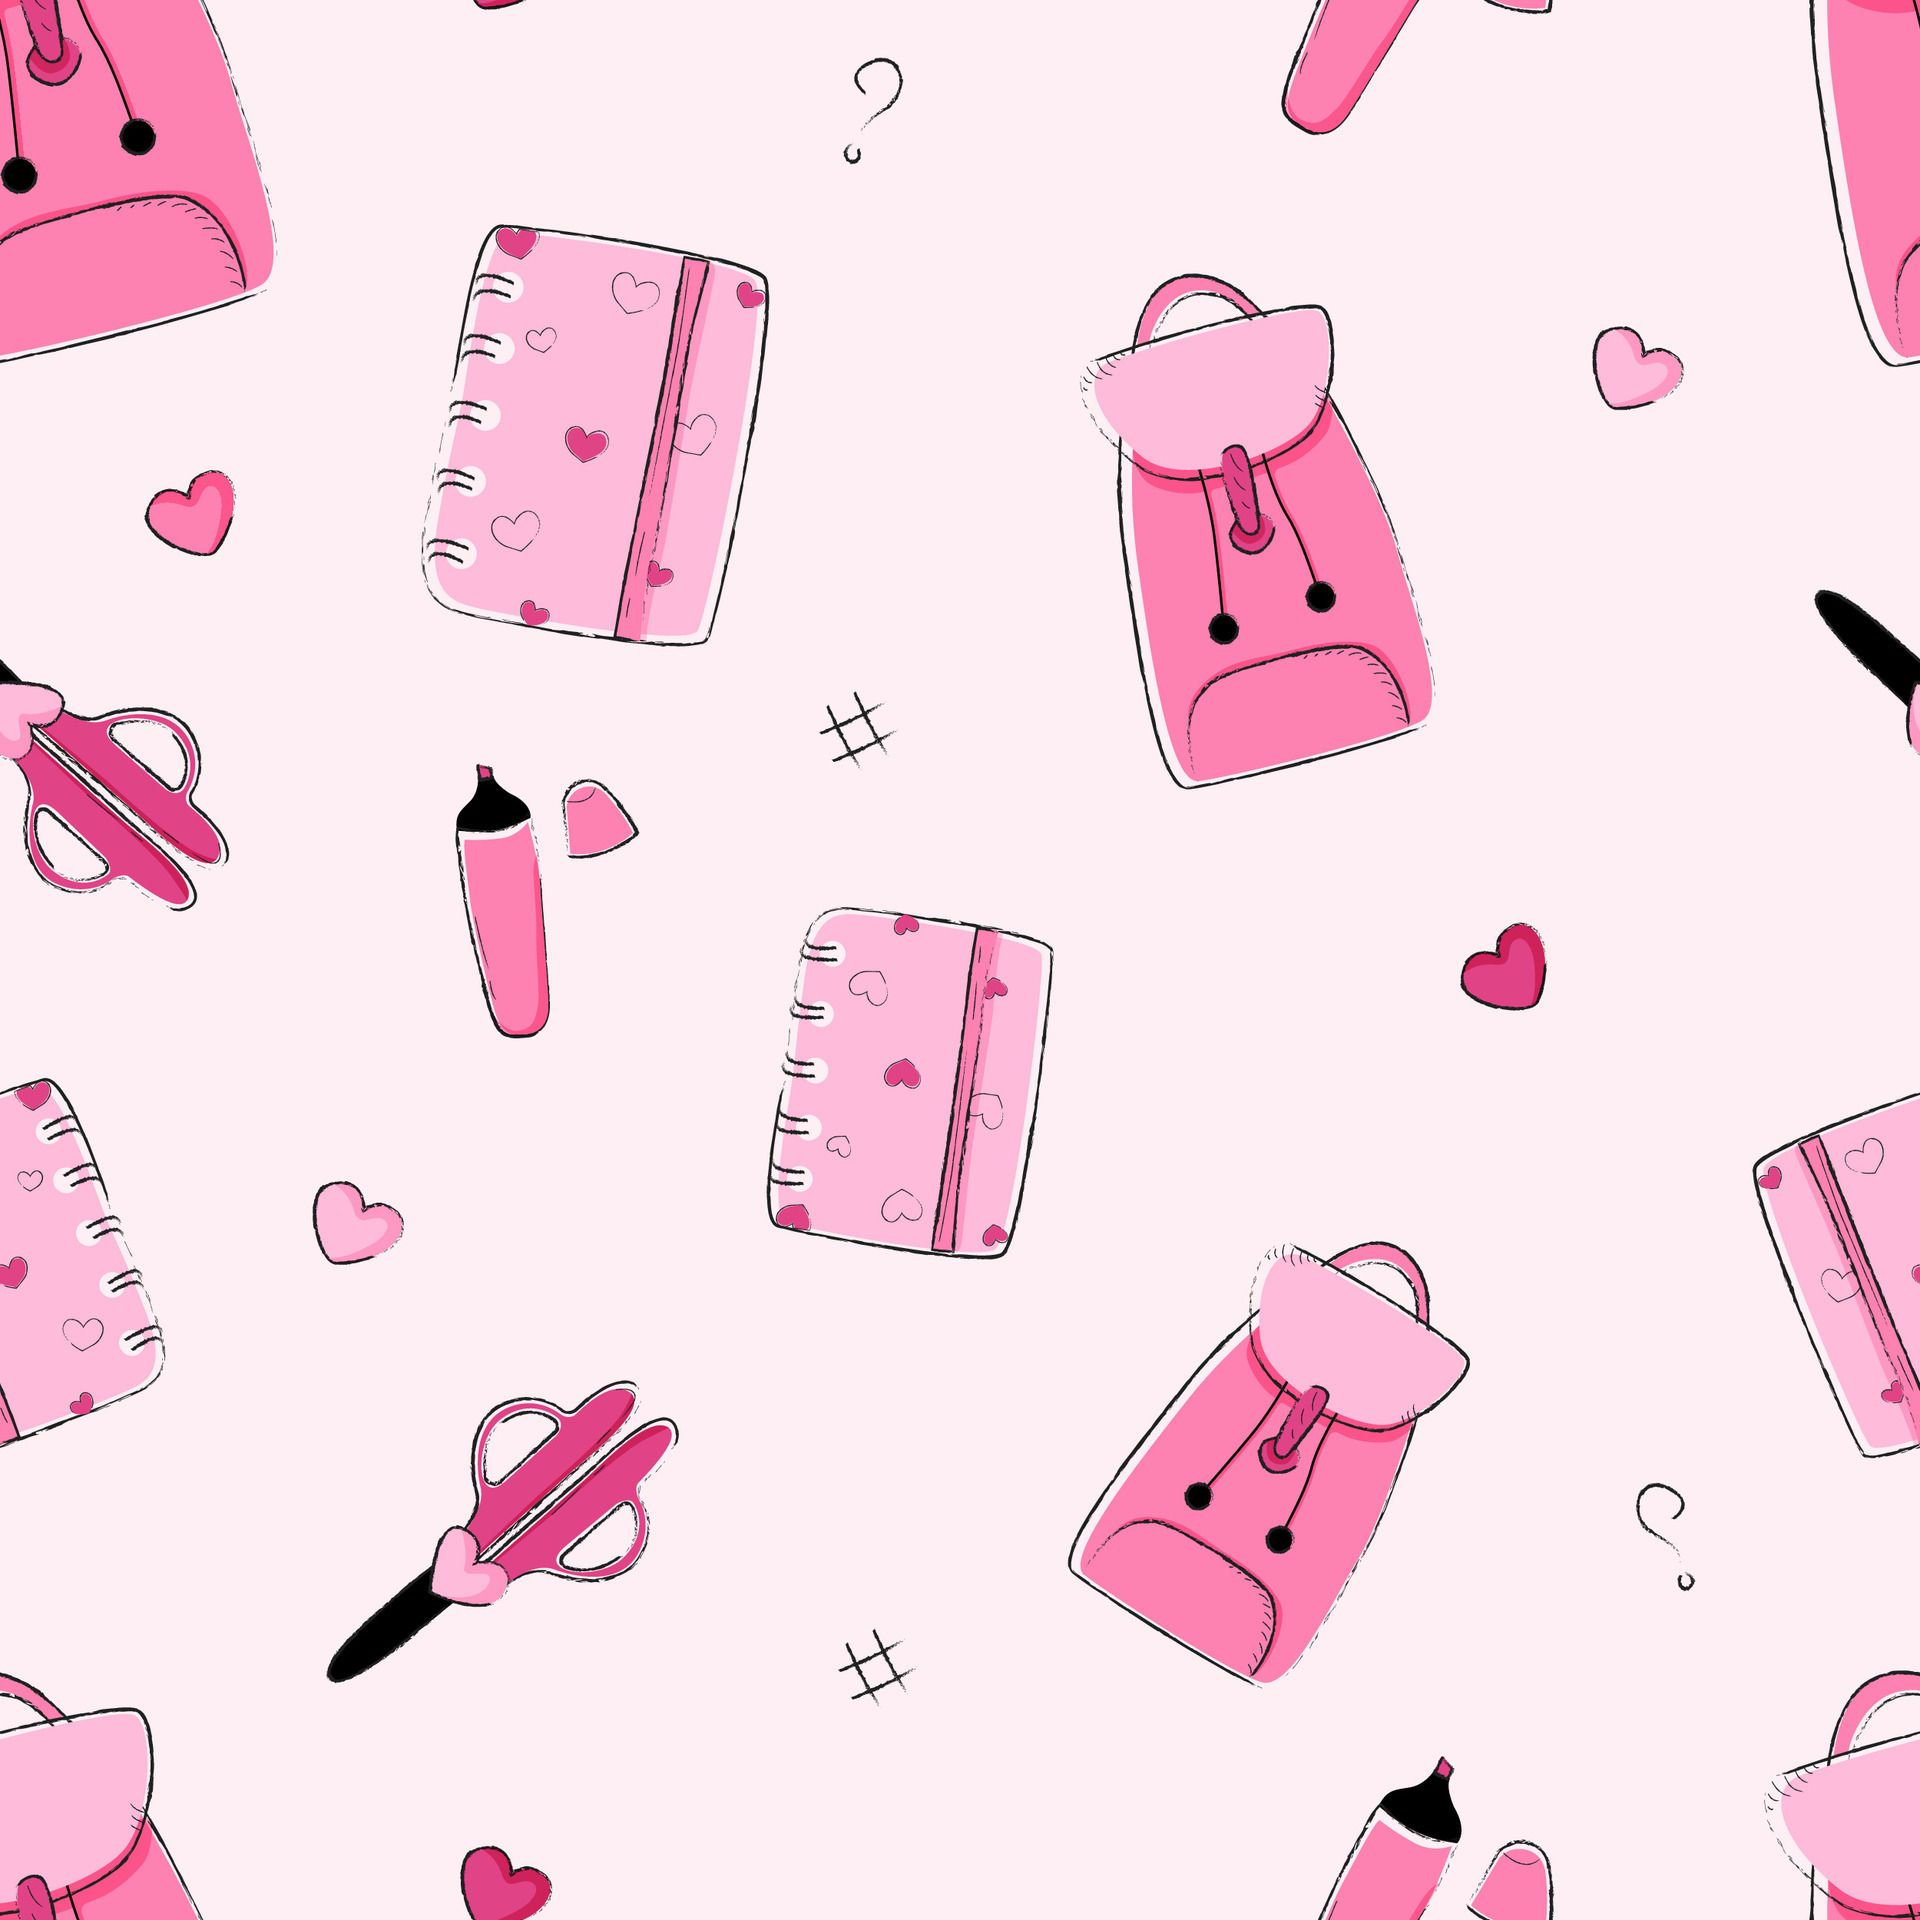 A pattern of pink school bags, notebooks, and pencils on a pink background - Barbie, school